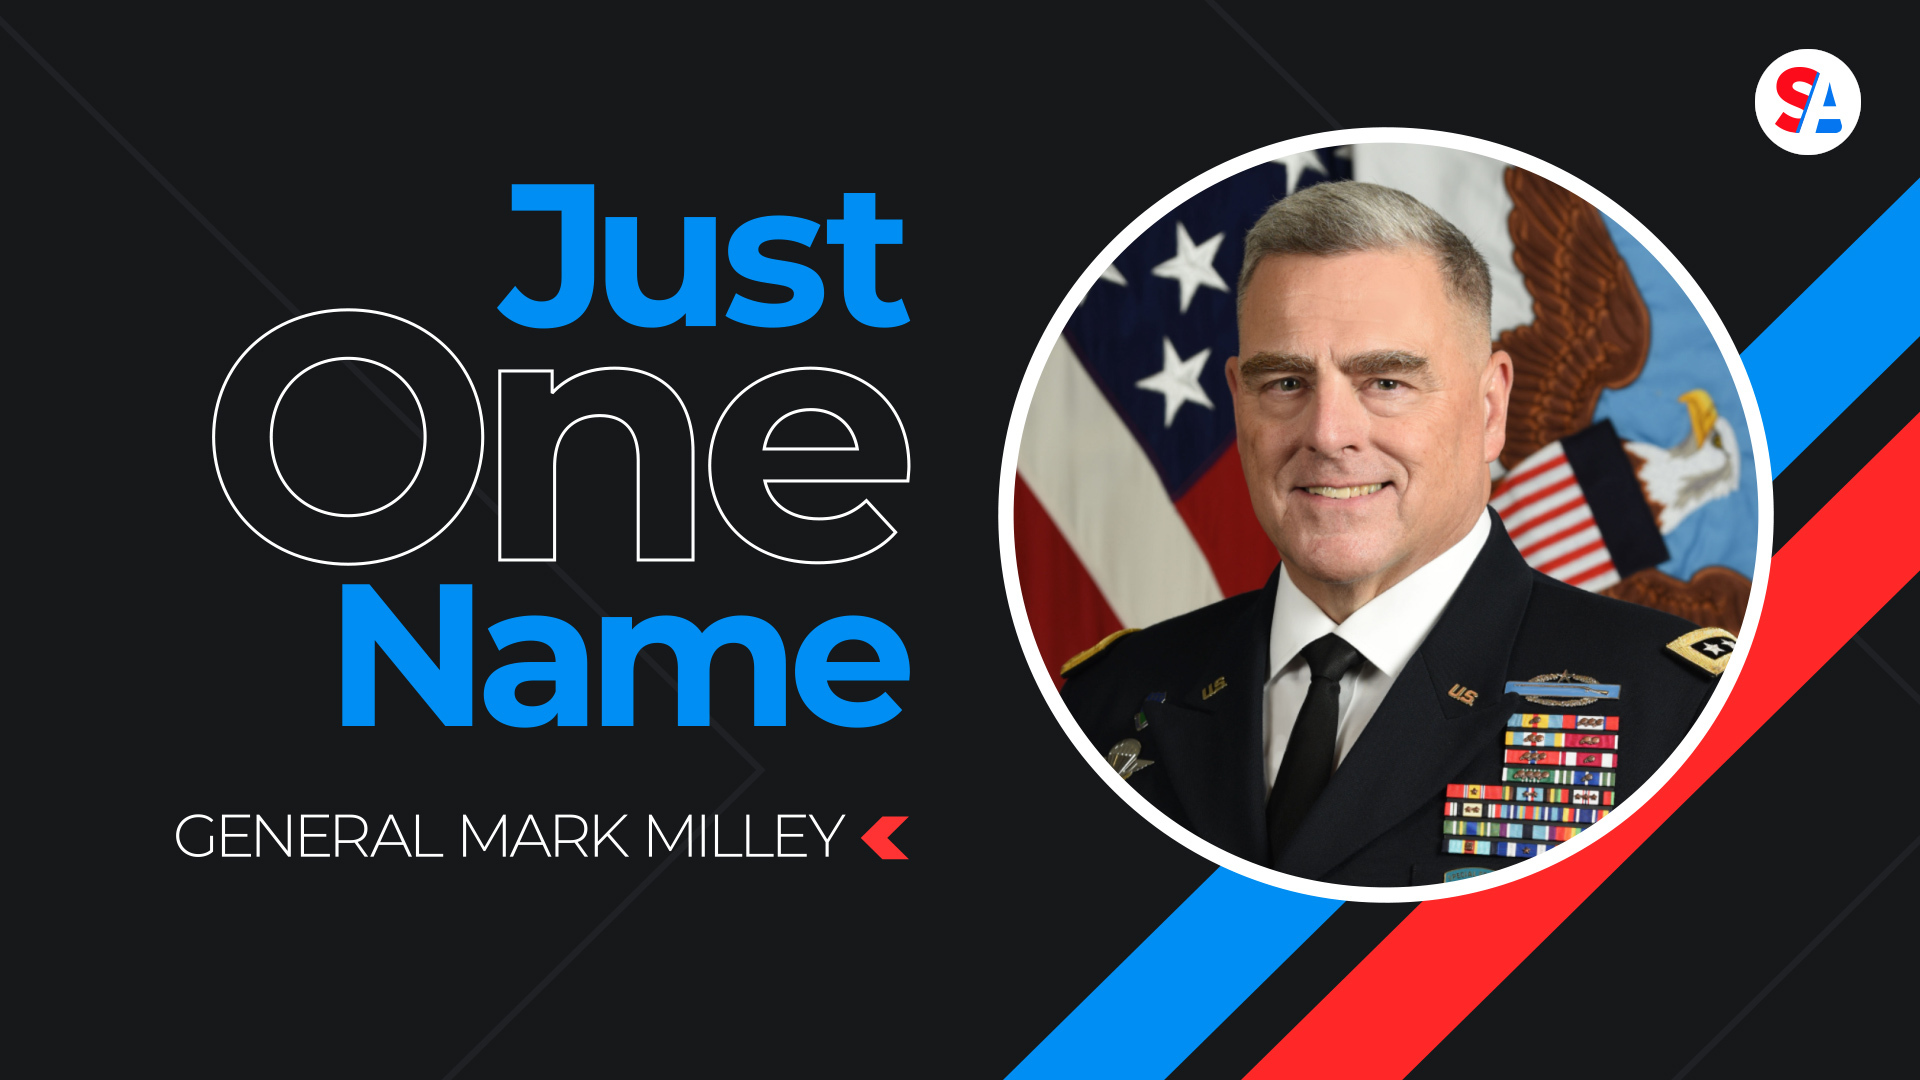 General Mark Milley reached out to a Chinese counterpart during the Trump presidency.